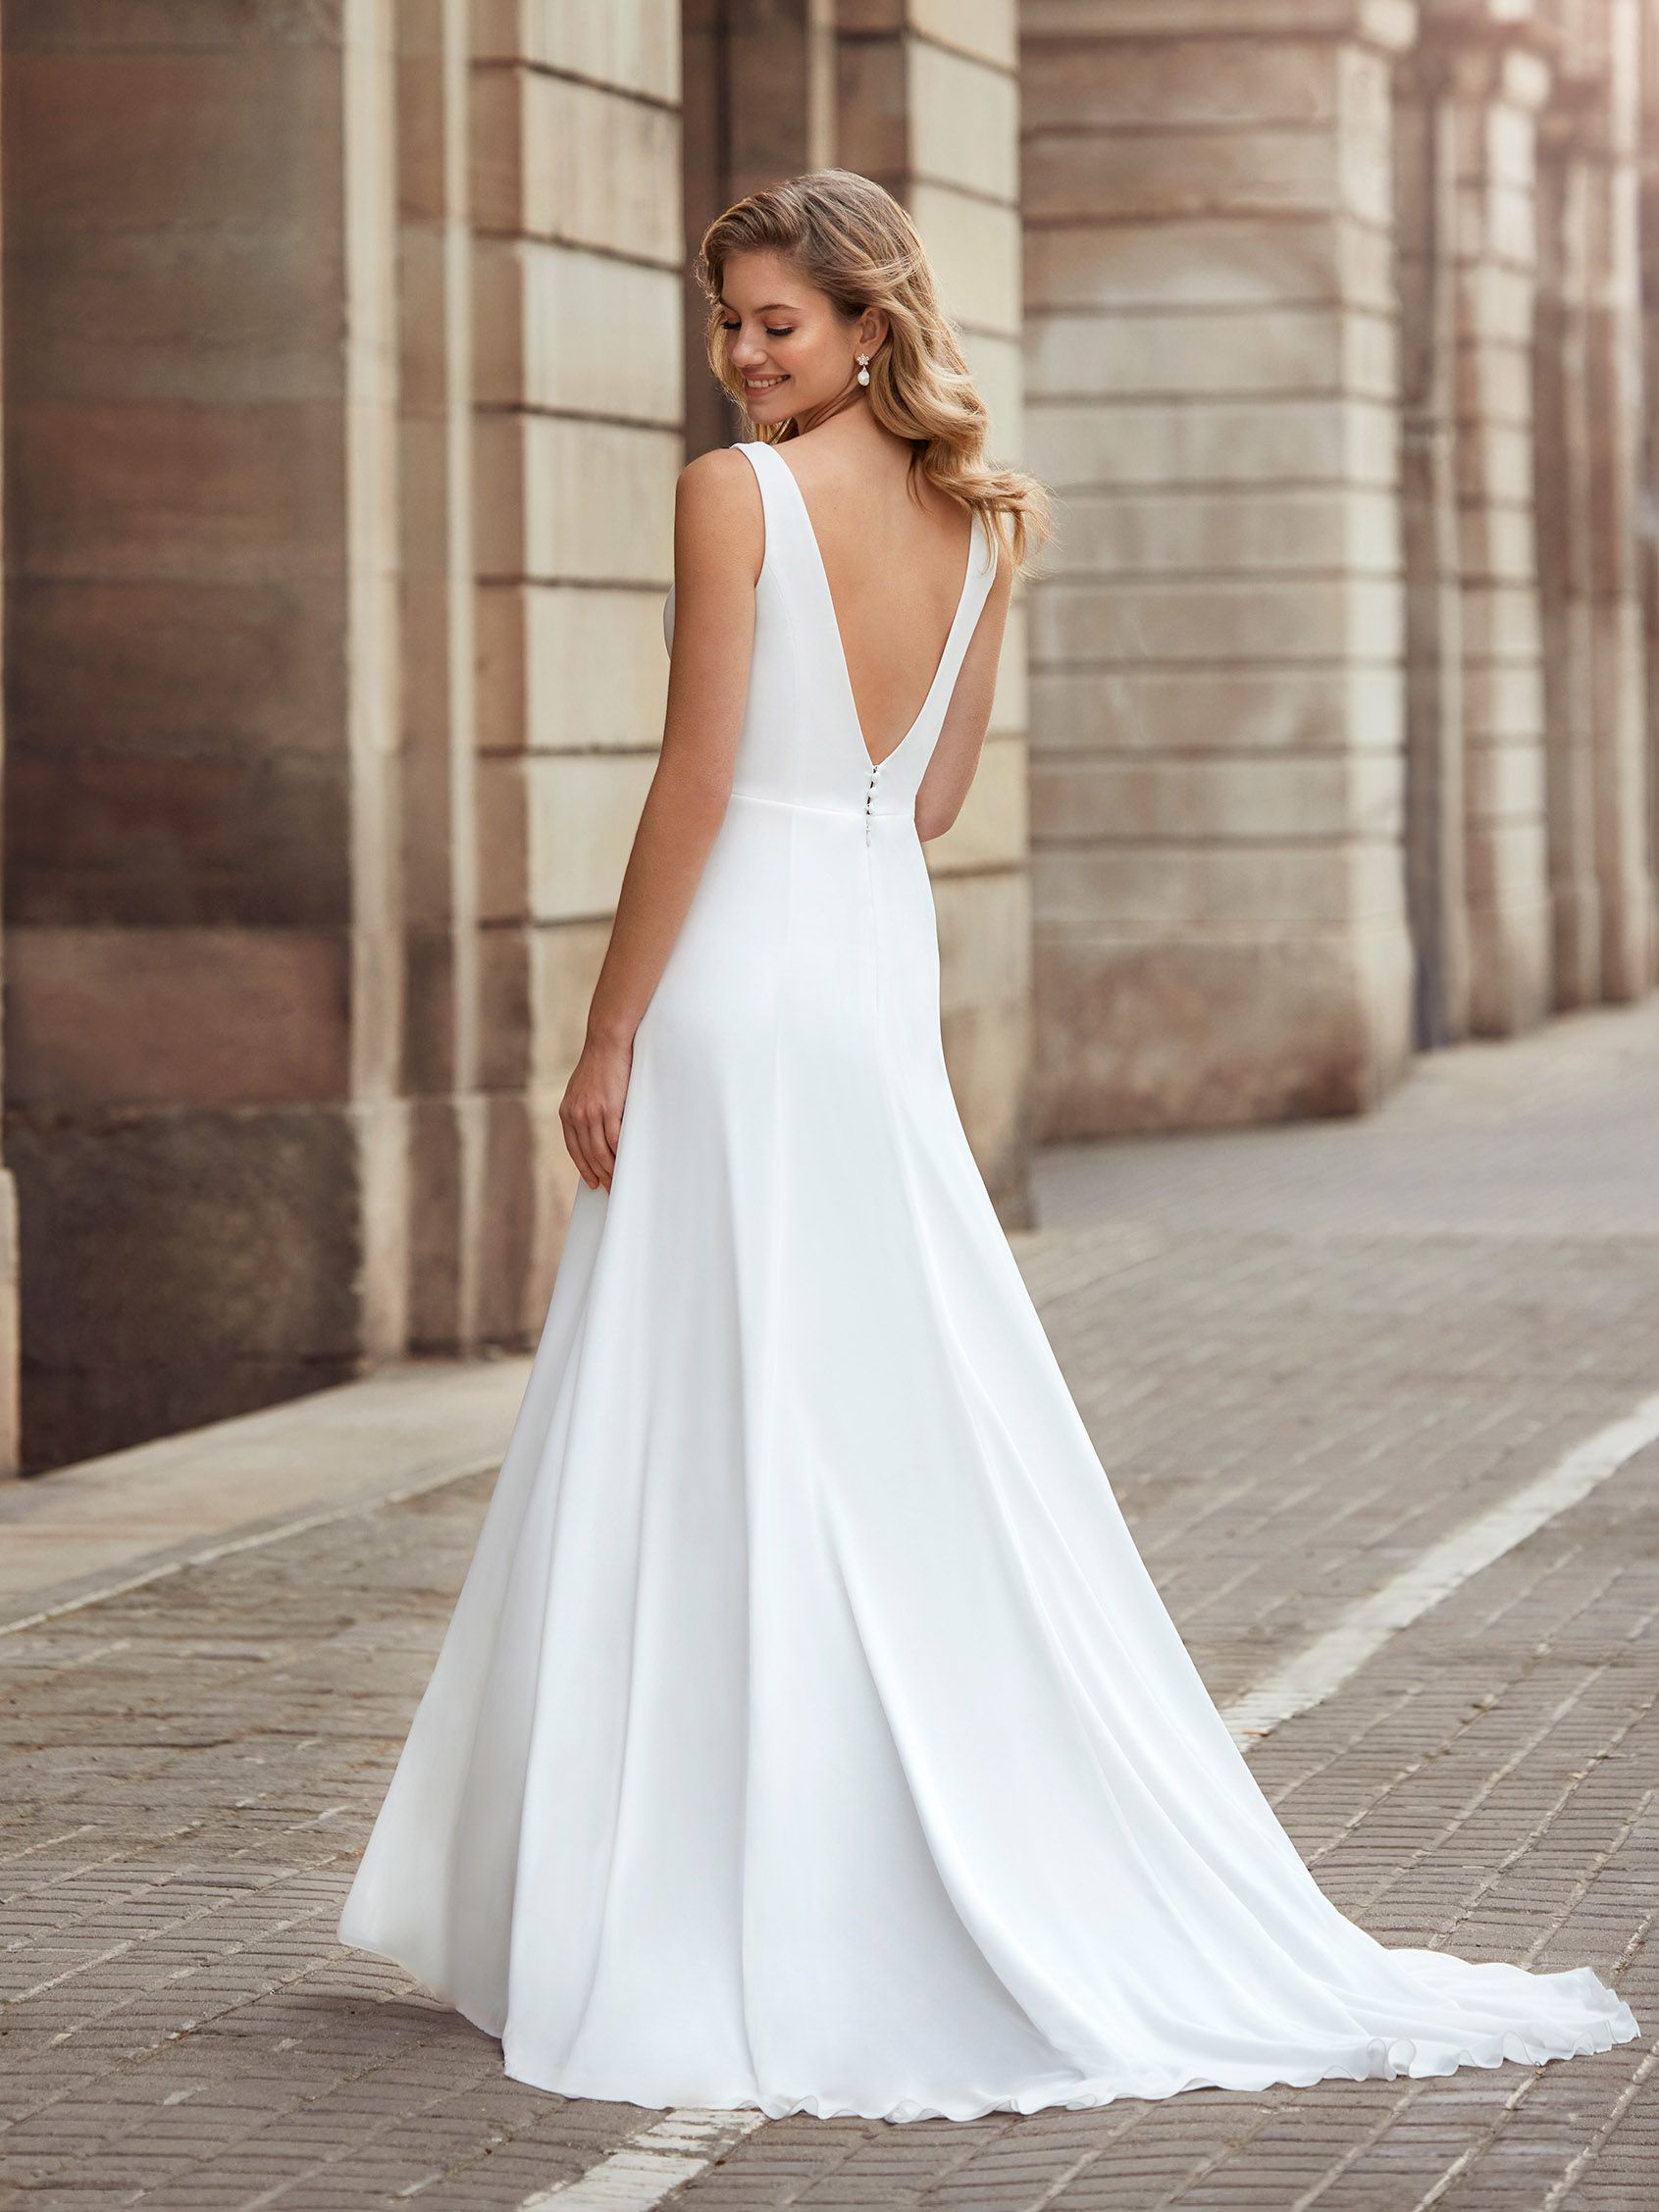 Umbra | White One | Bridal Wear | Turner & Pennell Bridal Gallery